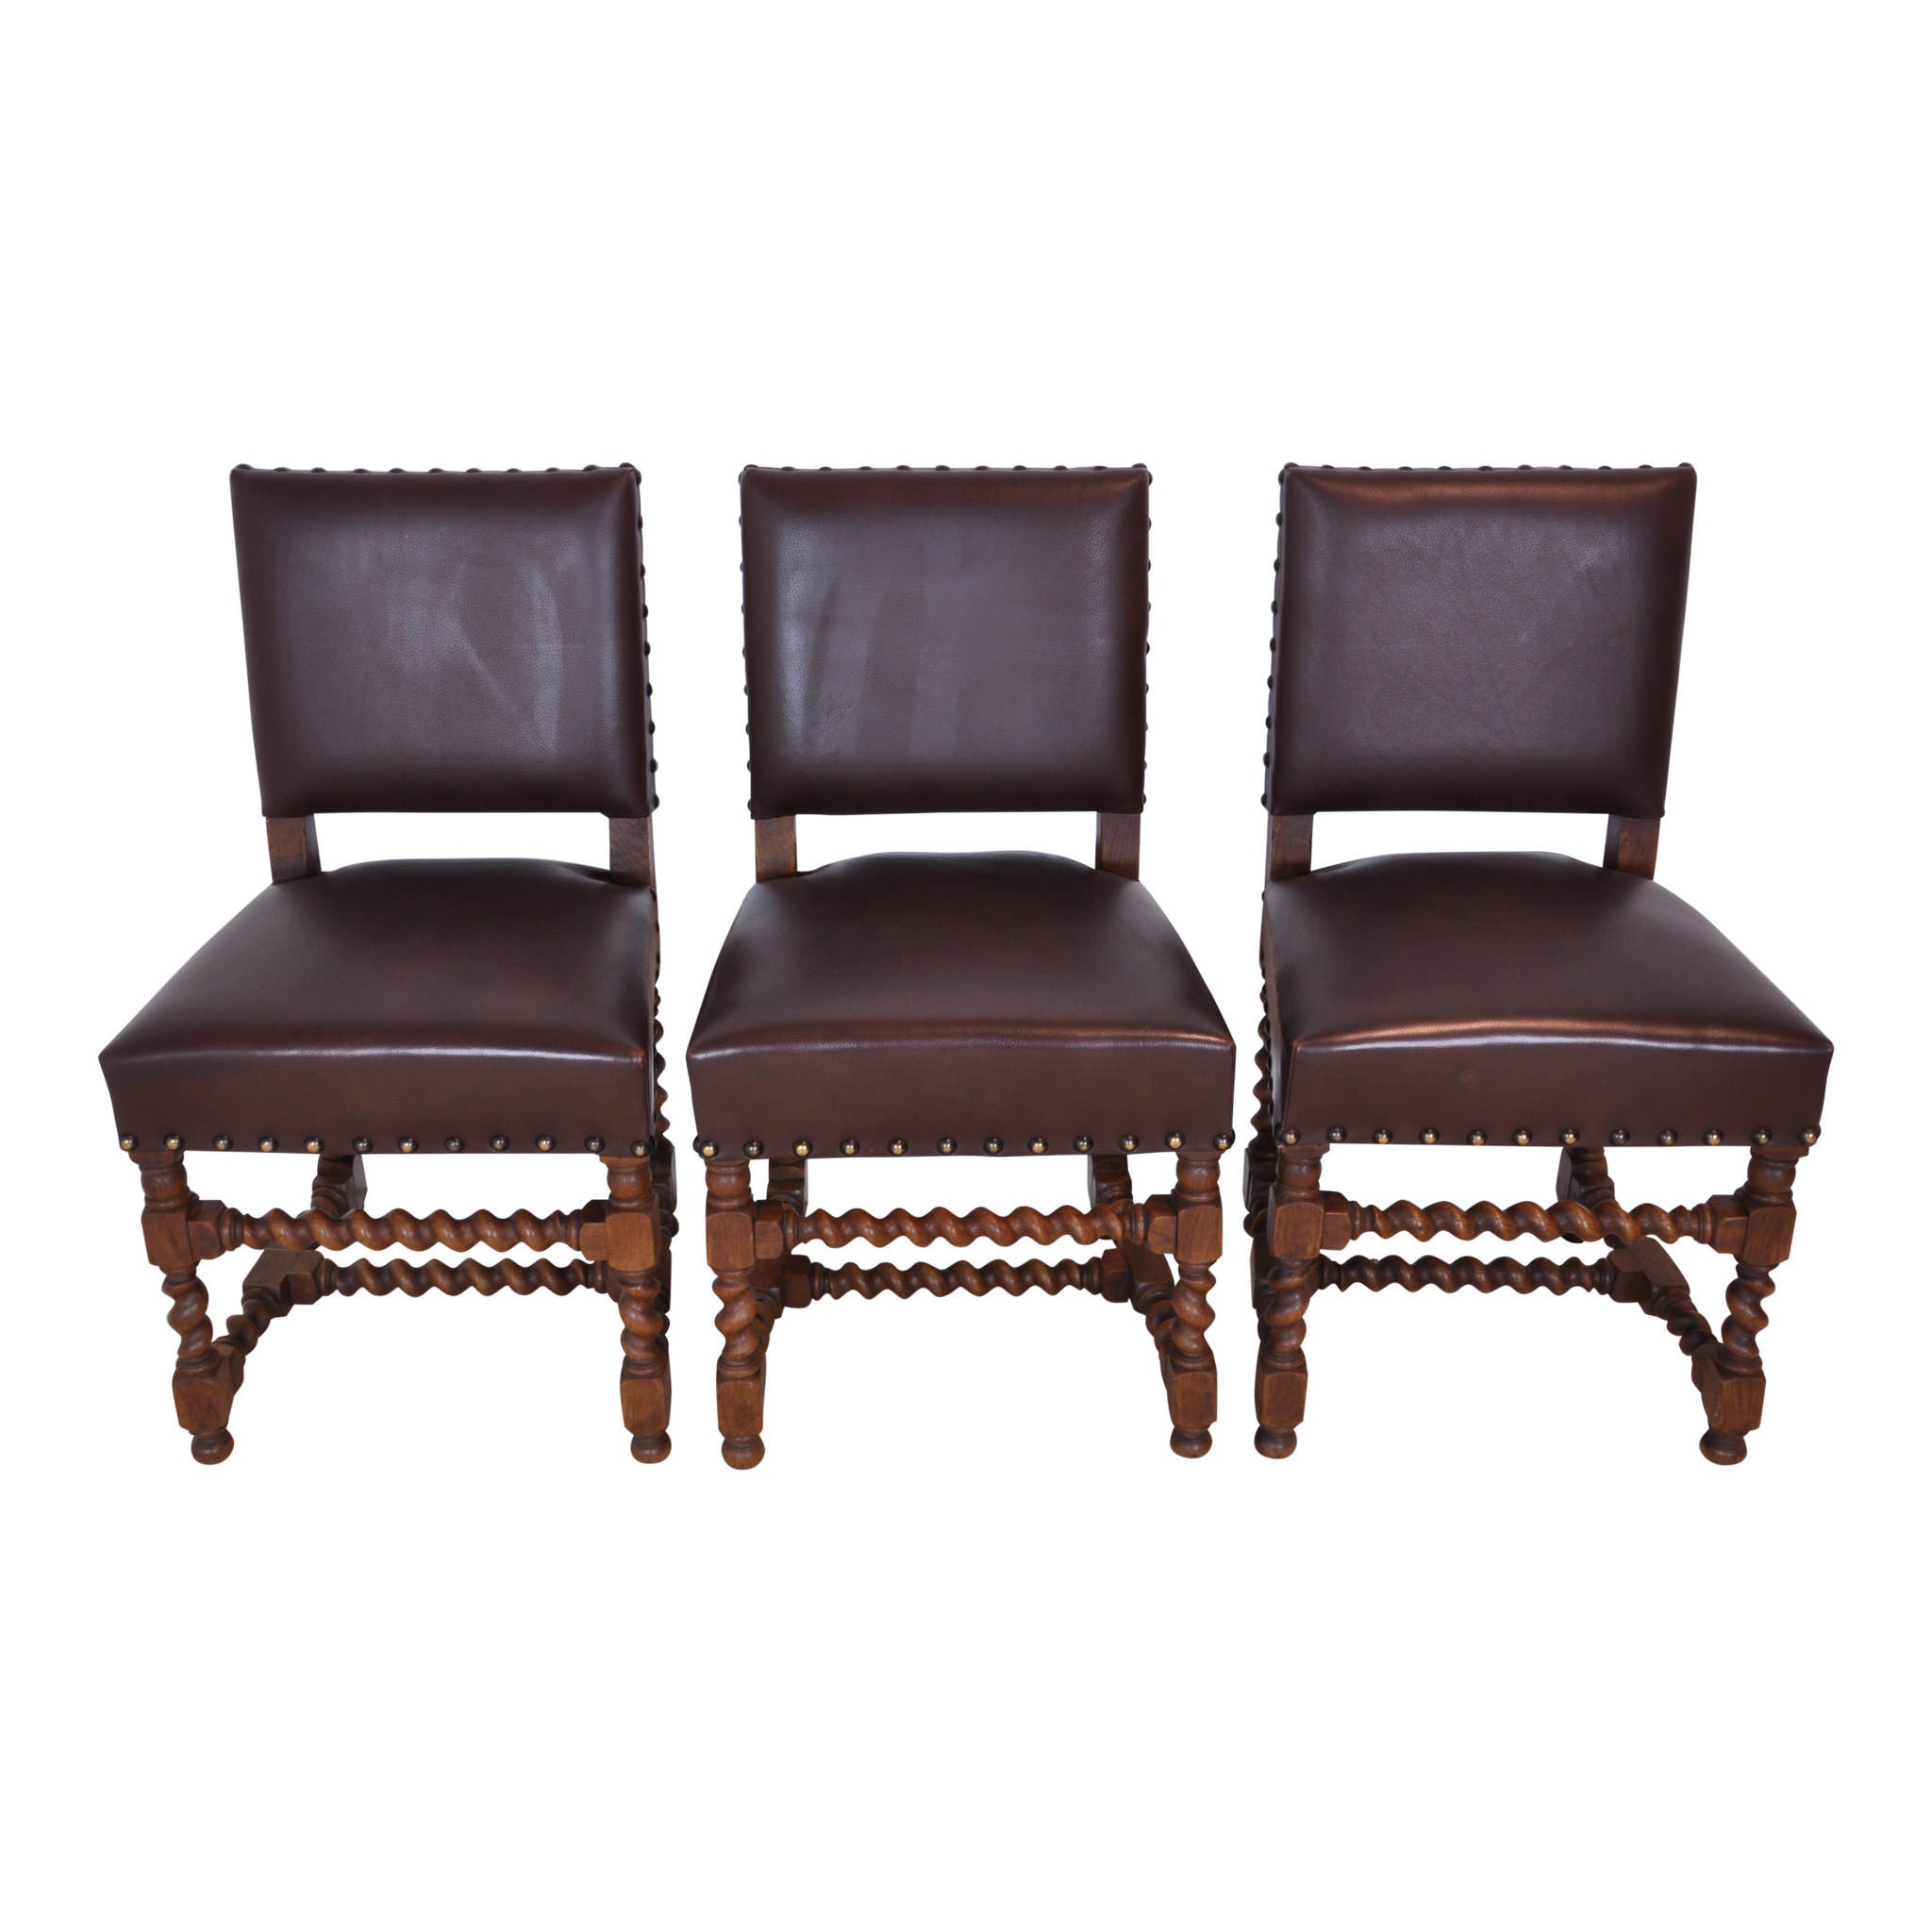 French Twist Chairs Set/6